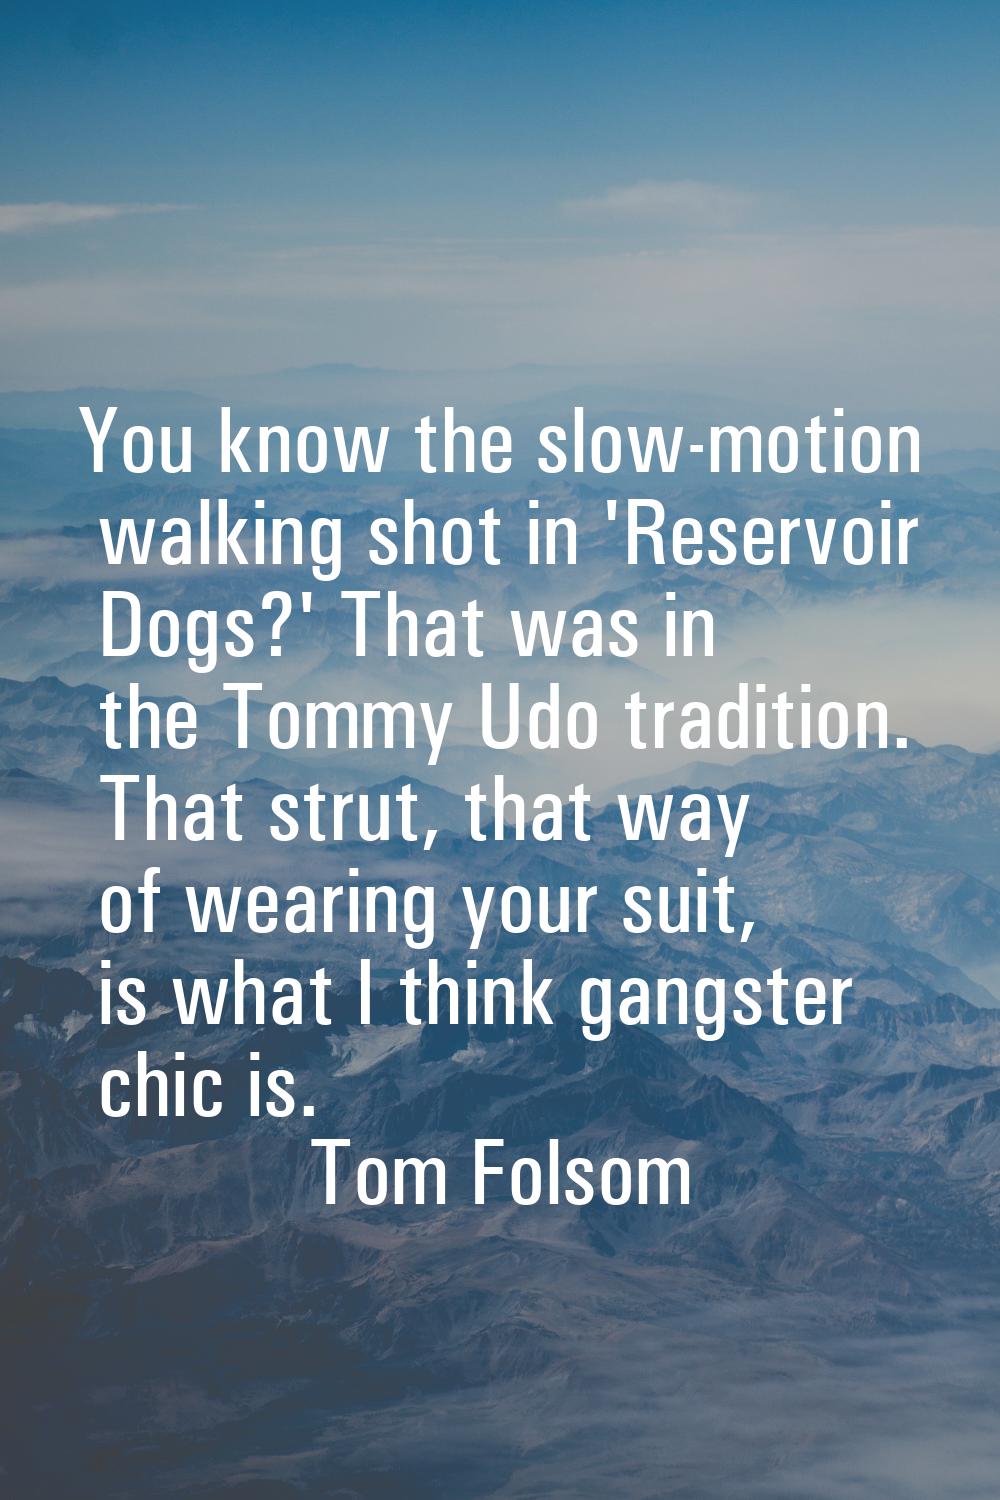 You know the slow-motion walking shot in 'Reservoir Dogs?' That was in the Tommy Udo tradition. Tha